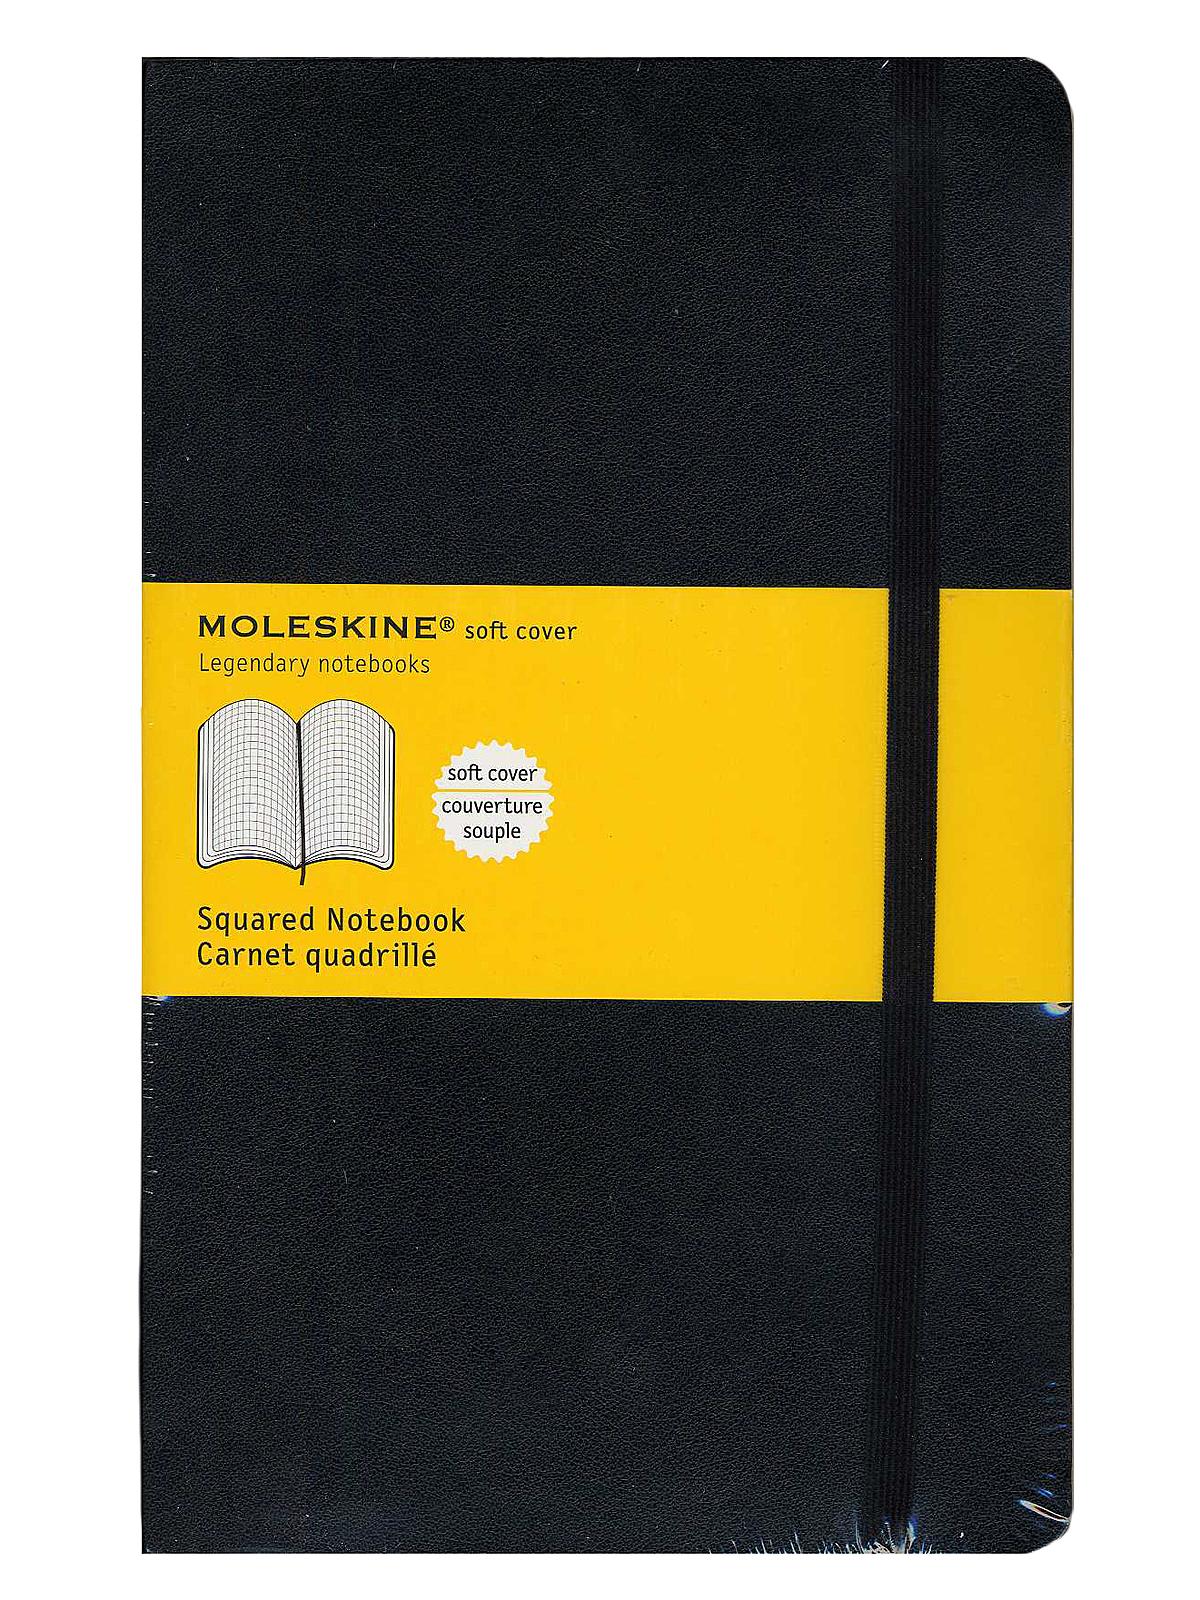 Classic Soft Cover Notebooks Black 5 In. X 8 1 4 In. 192 Pages, Squared